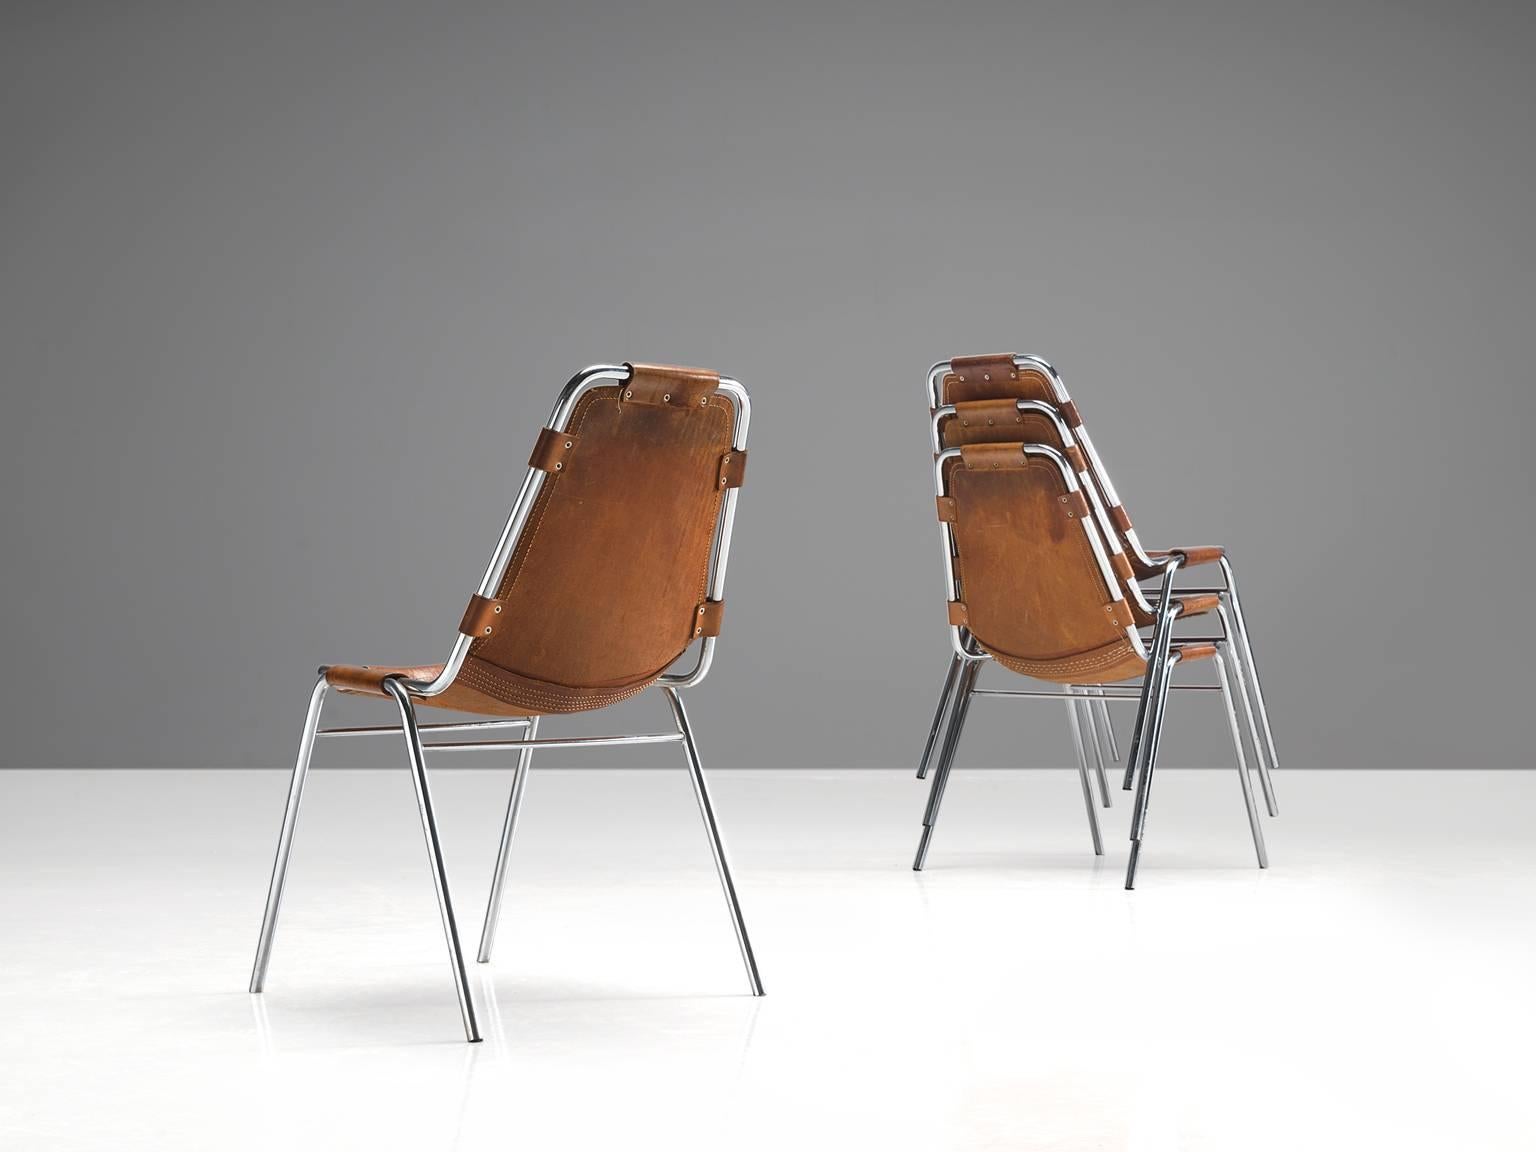 French Set of Four Les Arcs Chairs Selected by Charlotte Perriand